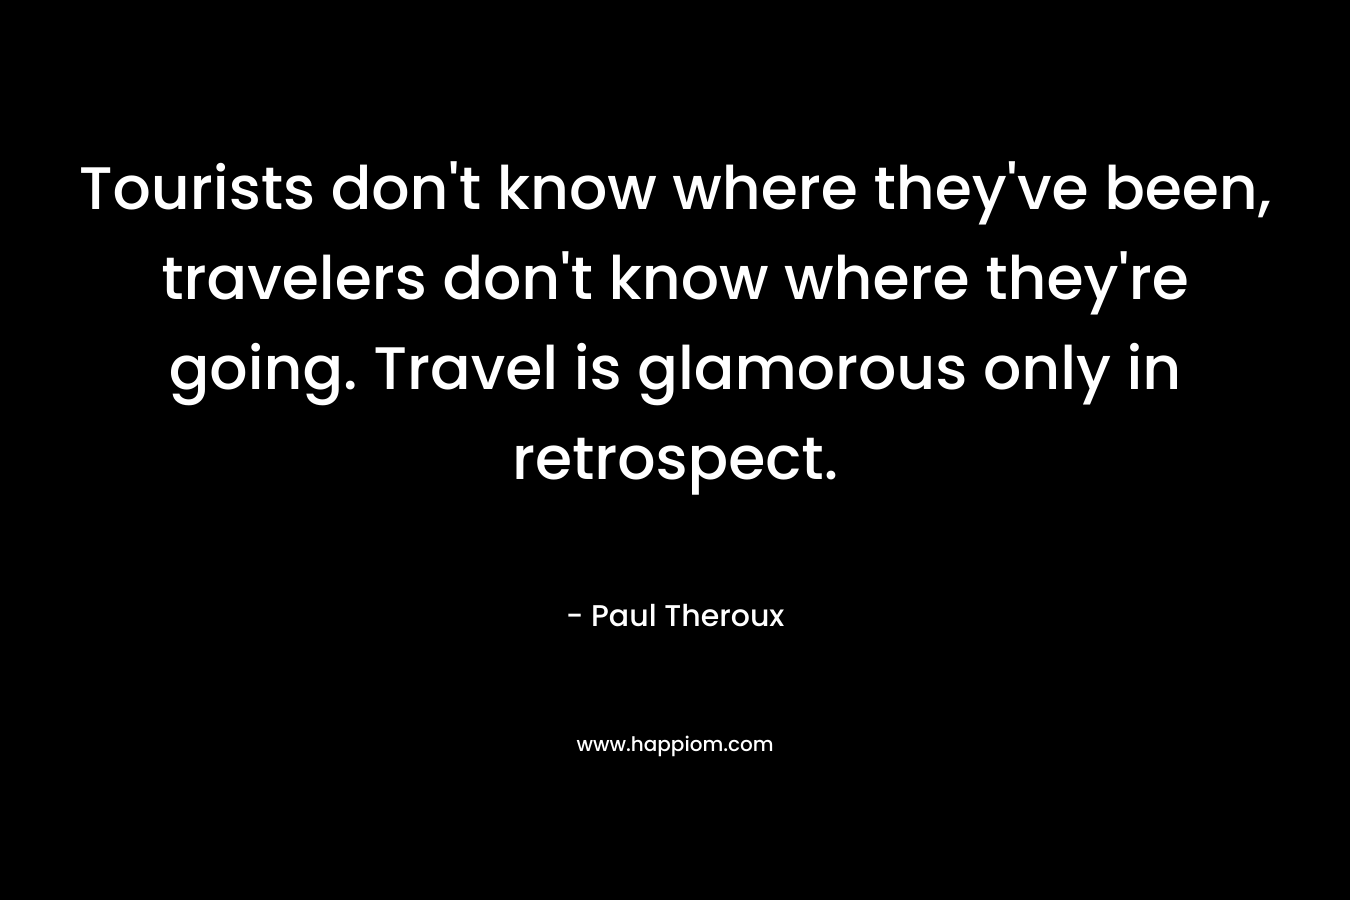 Tourists don’t know where they’ve been, travelers don’t know where they’re going. Travel is glamorous only in retrospect. – Paul Theroux